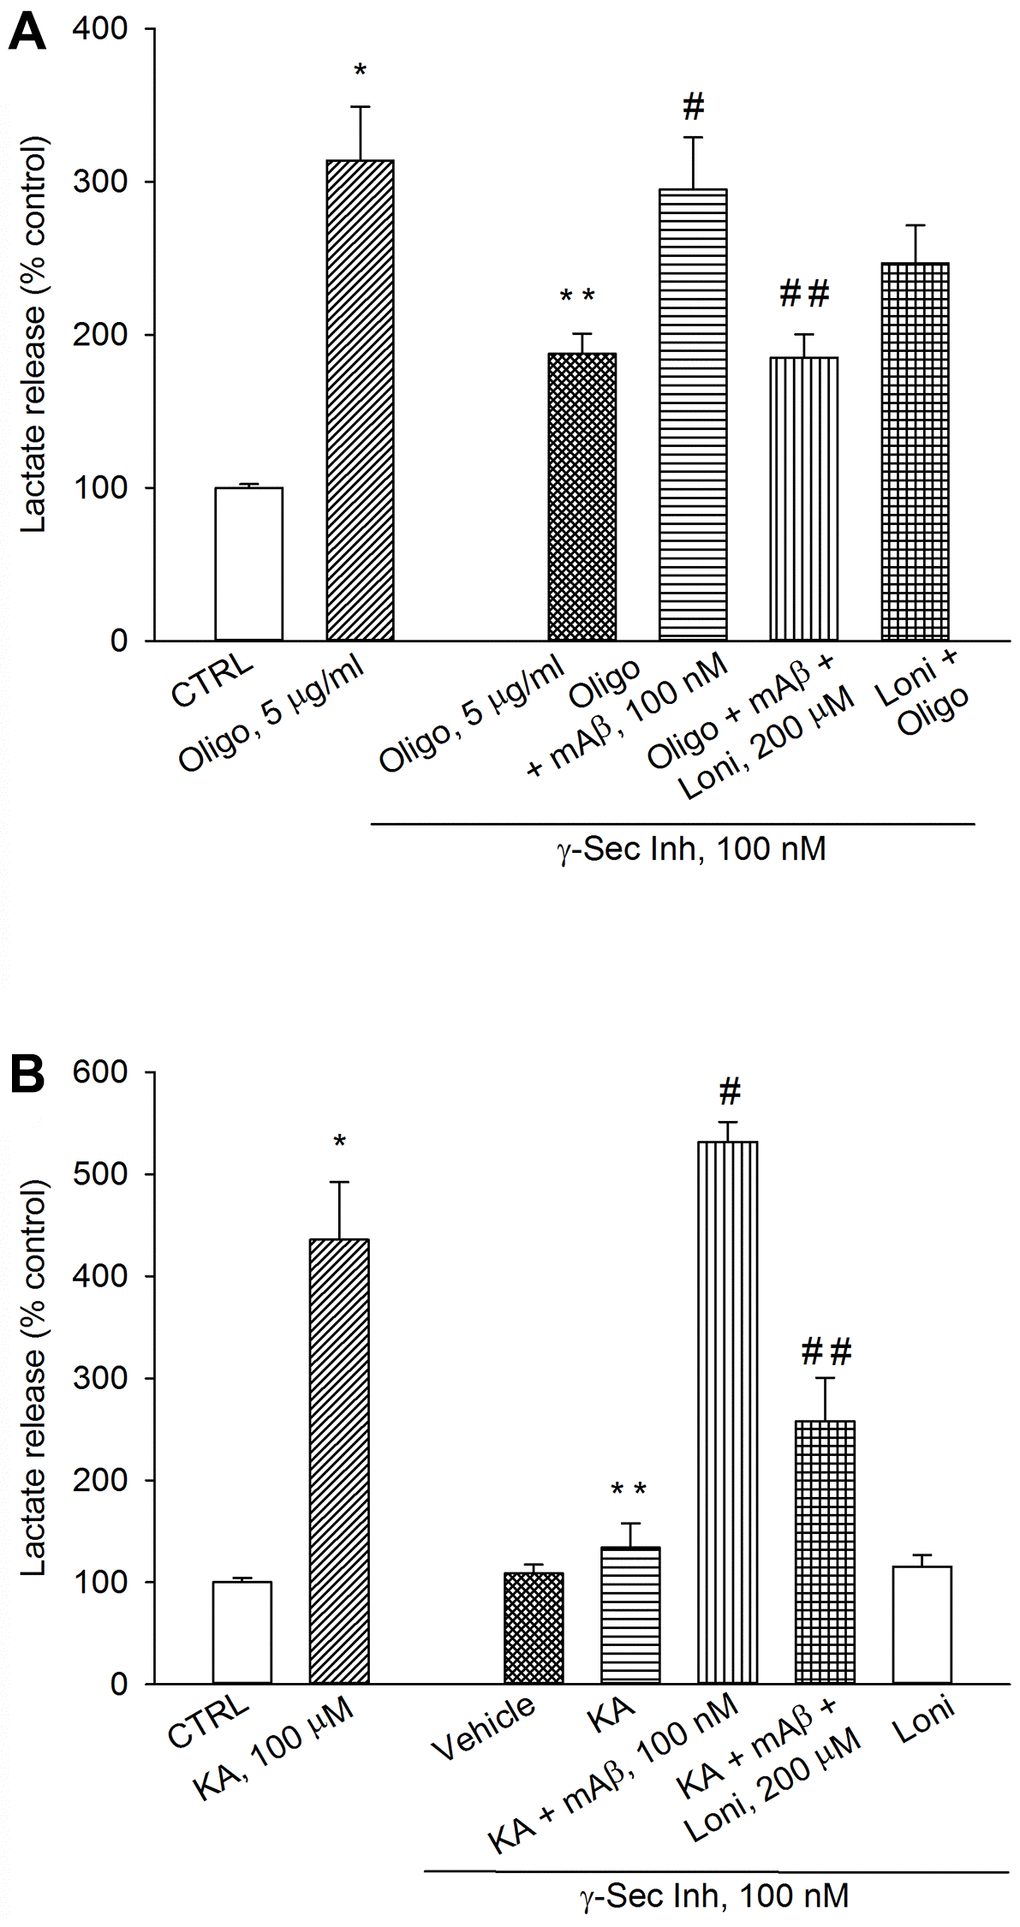 Inhibition of mitochondria-bound HK-1 by lonidamine prevented lactate production due to Aβ release. Neurons were glucose-starved for 2 hours before returning to 3 mM glucose. γ-Secretase inhibitor IX (γ-Sec Inh, 100 nM) reduced lactate release both in oligomycin-treated neurons (Oligo, 5 μg/ml for 1 hr) (A) and kainate-treated neurons (KA, 100 μM for 40 min) (B). The addition of synthetic Aβ42 monomers (mAβ, 100 nM) prevented the reduction of lactate release, induced by γ-Sec Inh, both in (A and B). Lonidamine (200 μM) reduced the rescuing effect of exogenous Aβ42 monomers in both cases (A and B). Bars represent the means ± SEM of 4 determinations. In (A) p *control (CTRL) or **Oligo in the absence of γ-Sec Inh, and p #Oligo + γ-Sec Inh or ##Oligo + γ-Sec Inh + mAβ. In (B) p *control (CTRL) or **KA in the absence of γ-Sec Inh or #KA + γ-Sec Inh, and p ##KA + γ-Sec Inh + mAβ; one-way ANOVA with post hoc Fisher LSD multiple comparison method.